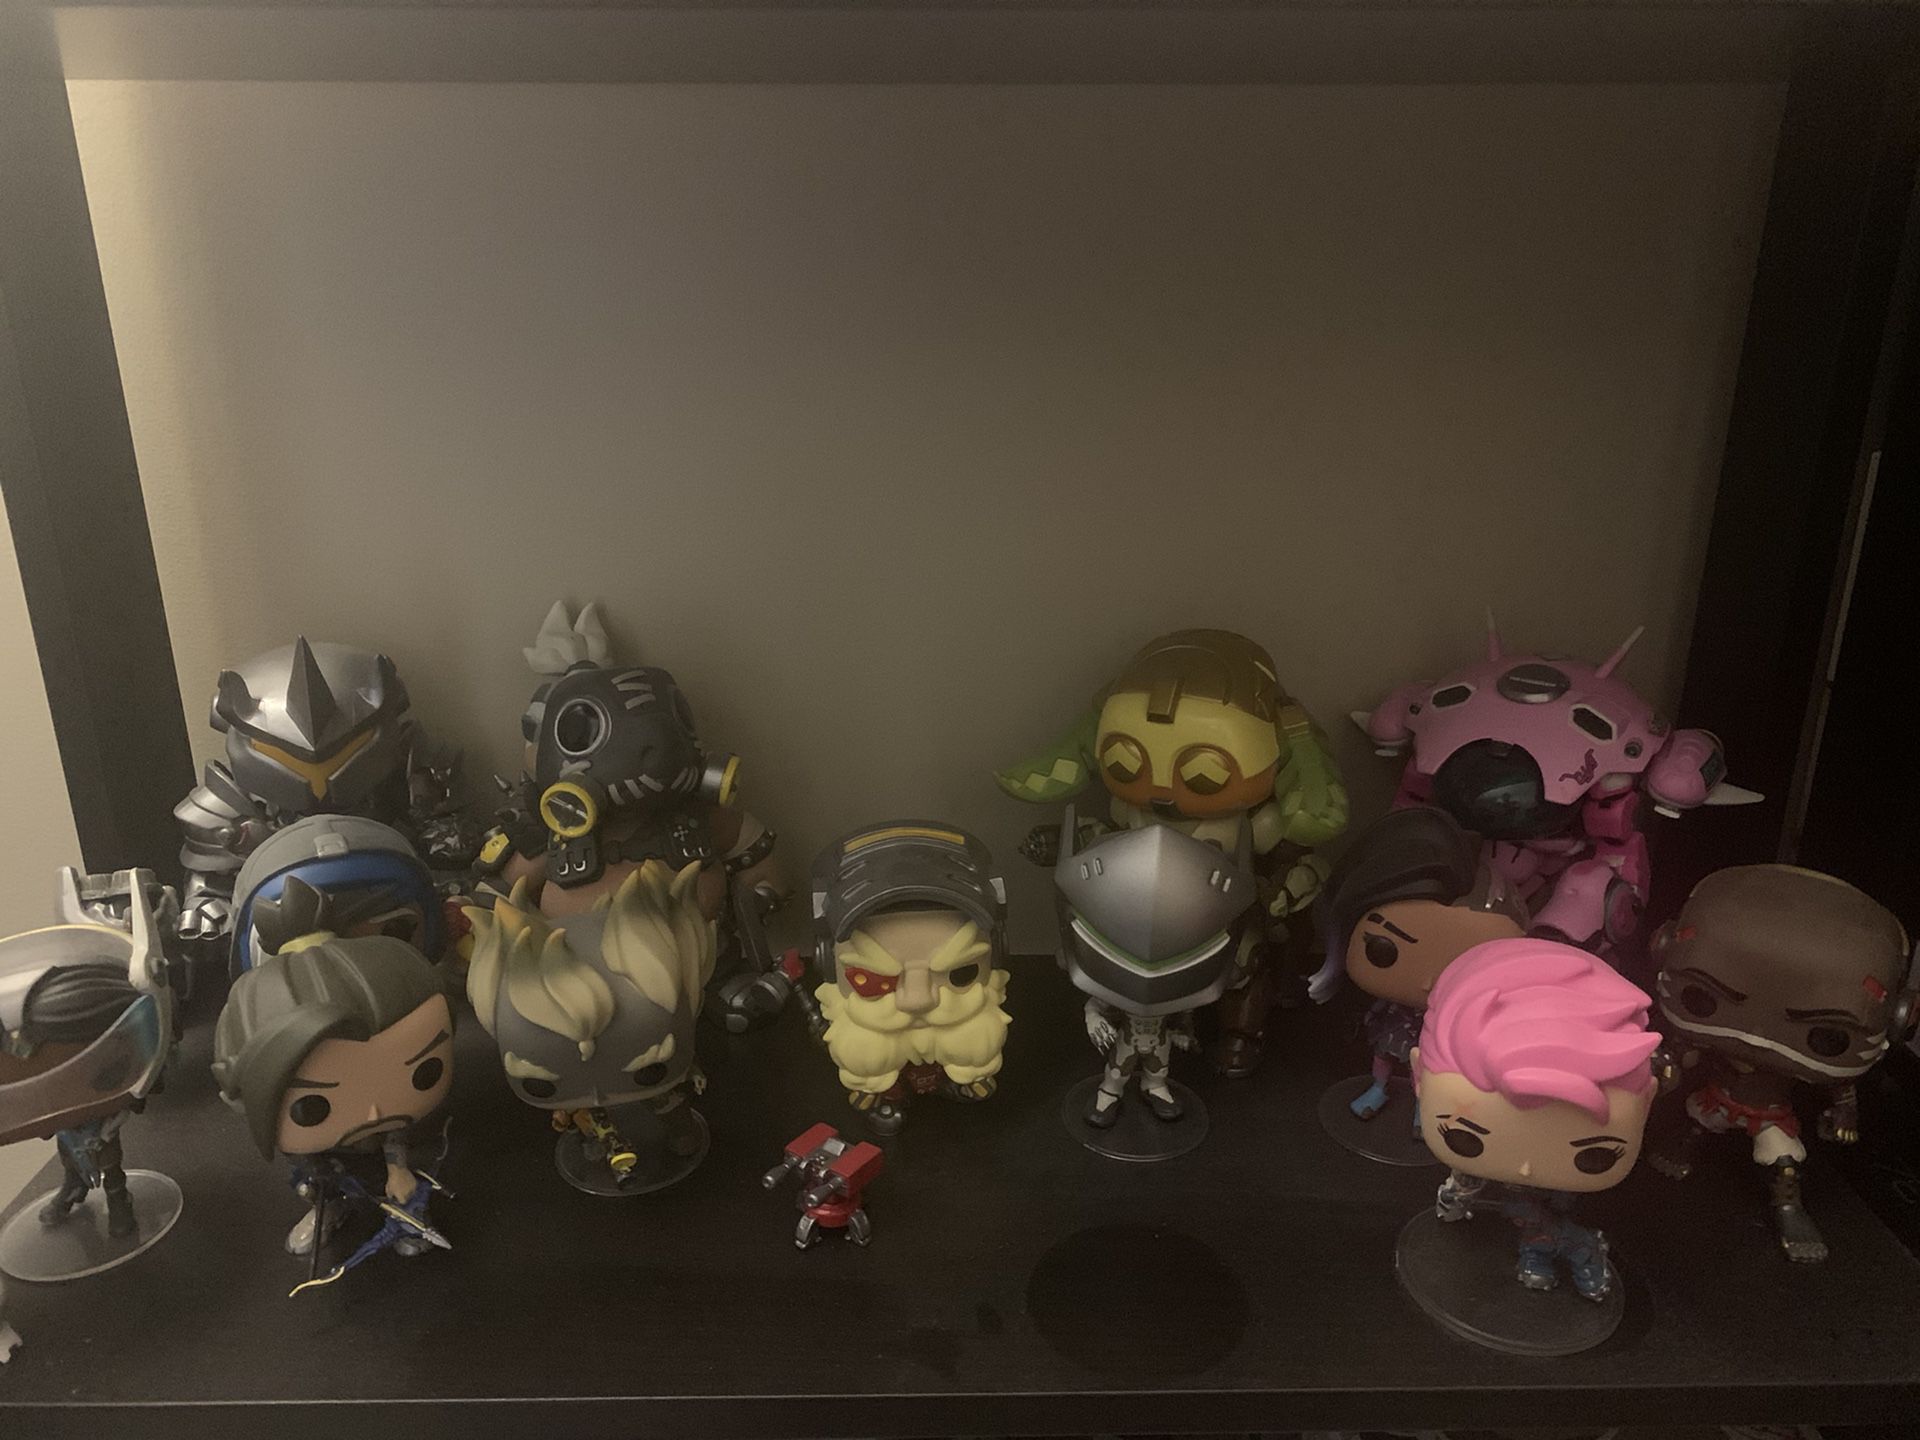 [Boxed/OOB] Overwatch Funko Pop Collection - Whole Lot or Separate